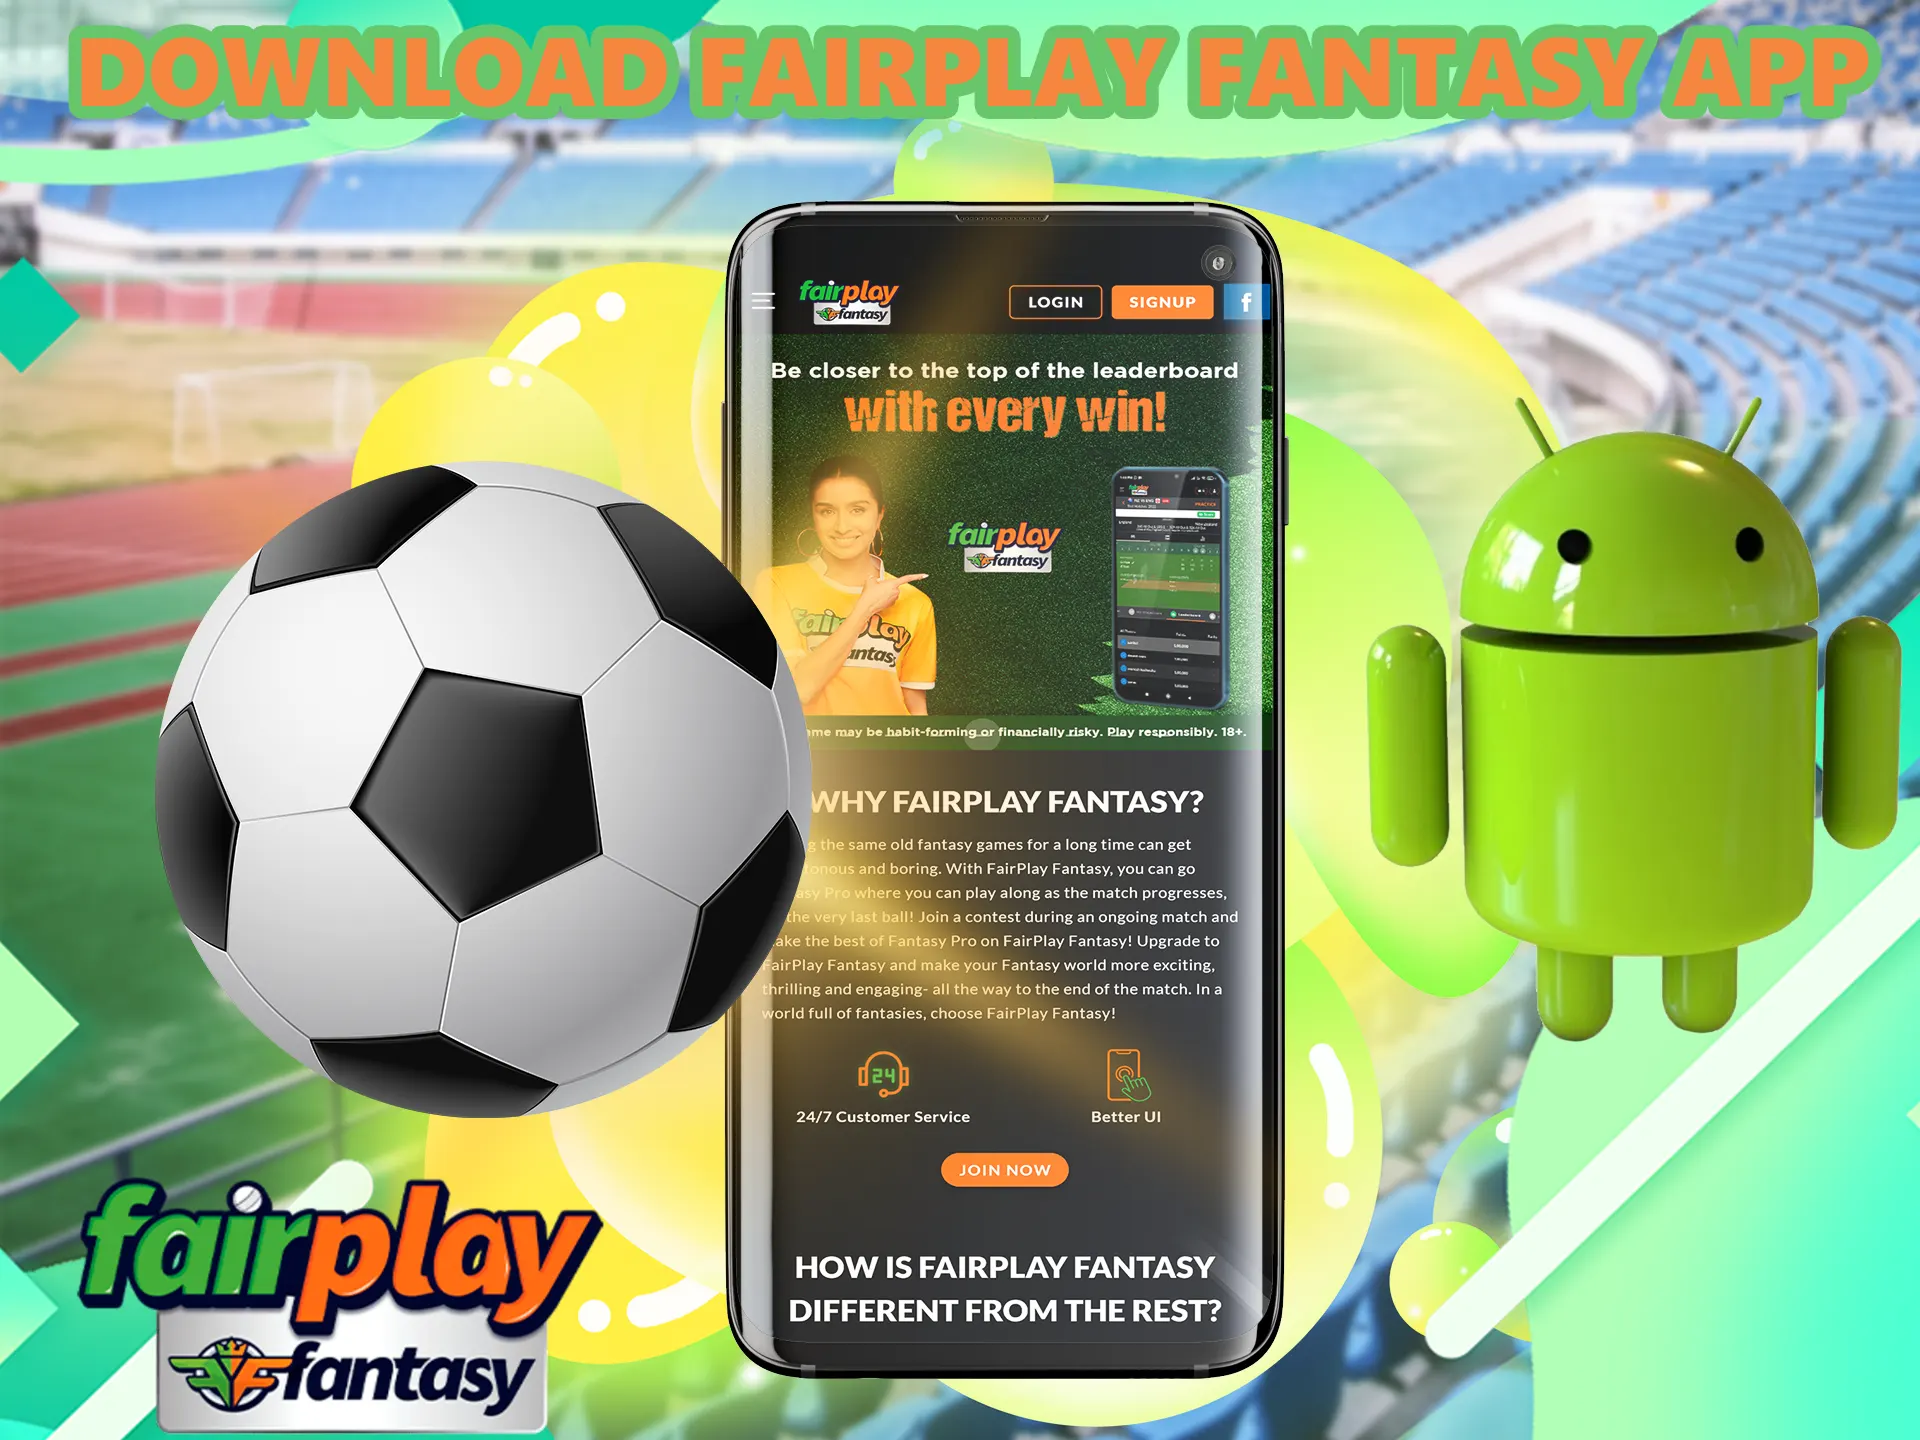 If you want to play comfortably with friends wherever you like, the Fairplay Fantasy app can help.